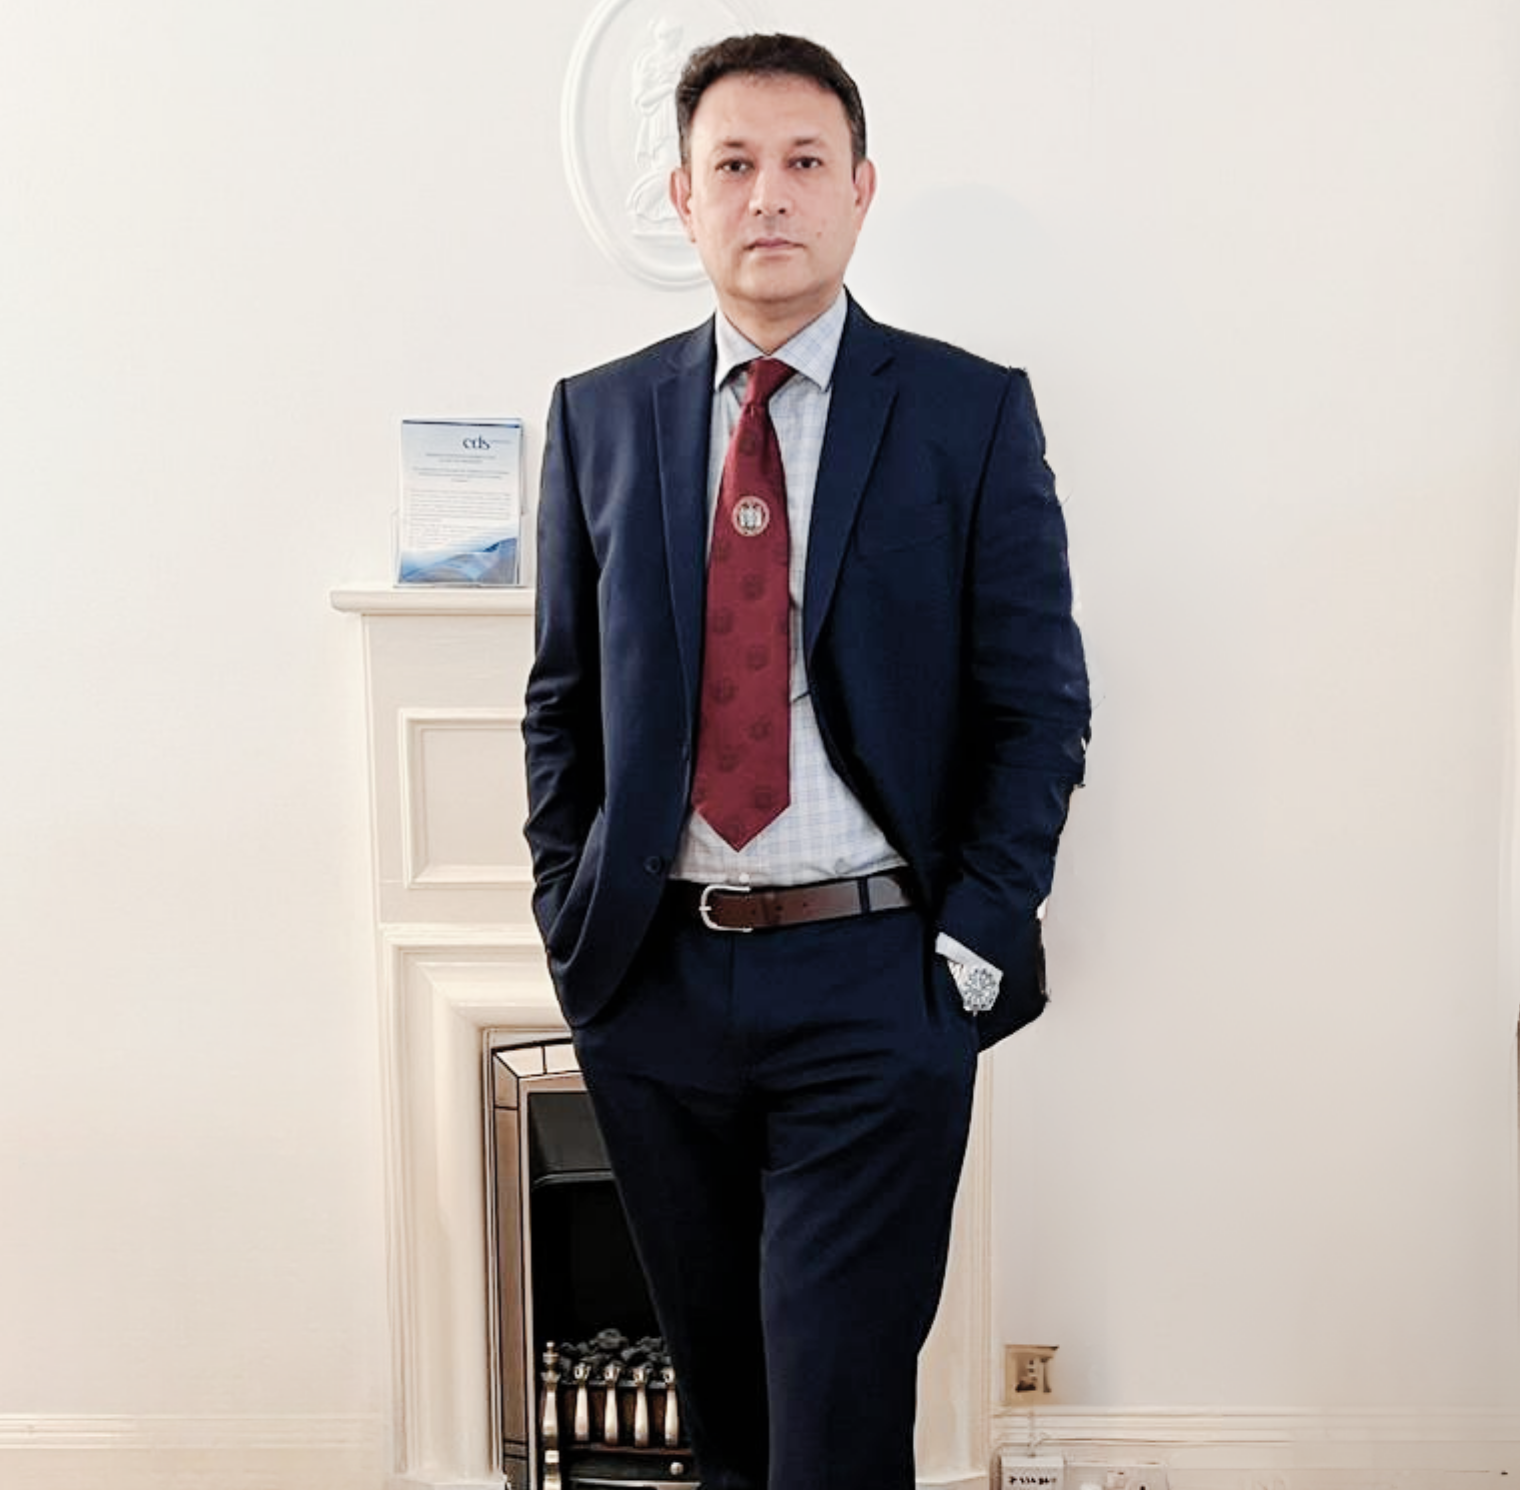 Dr SNA (Surgeon Of The Best Aesthetic Clinic London)